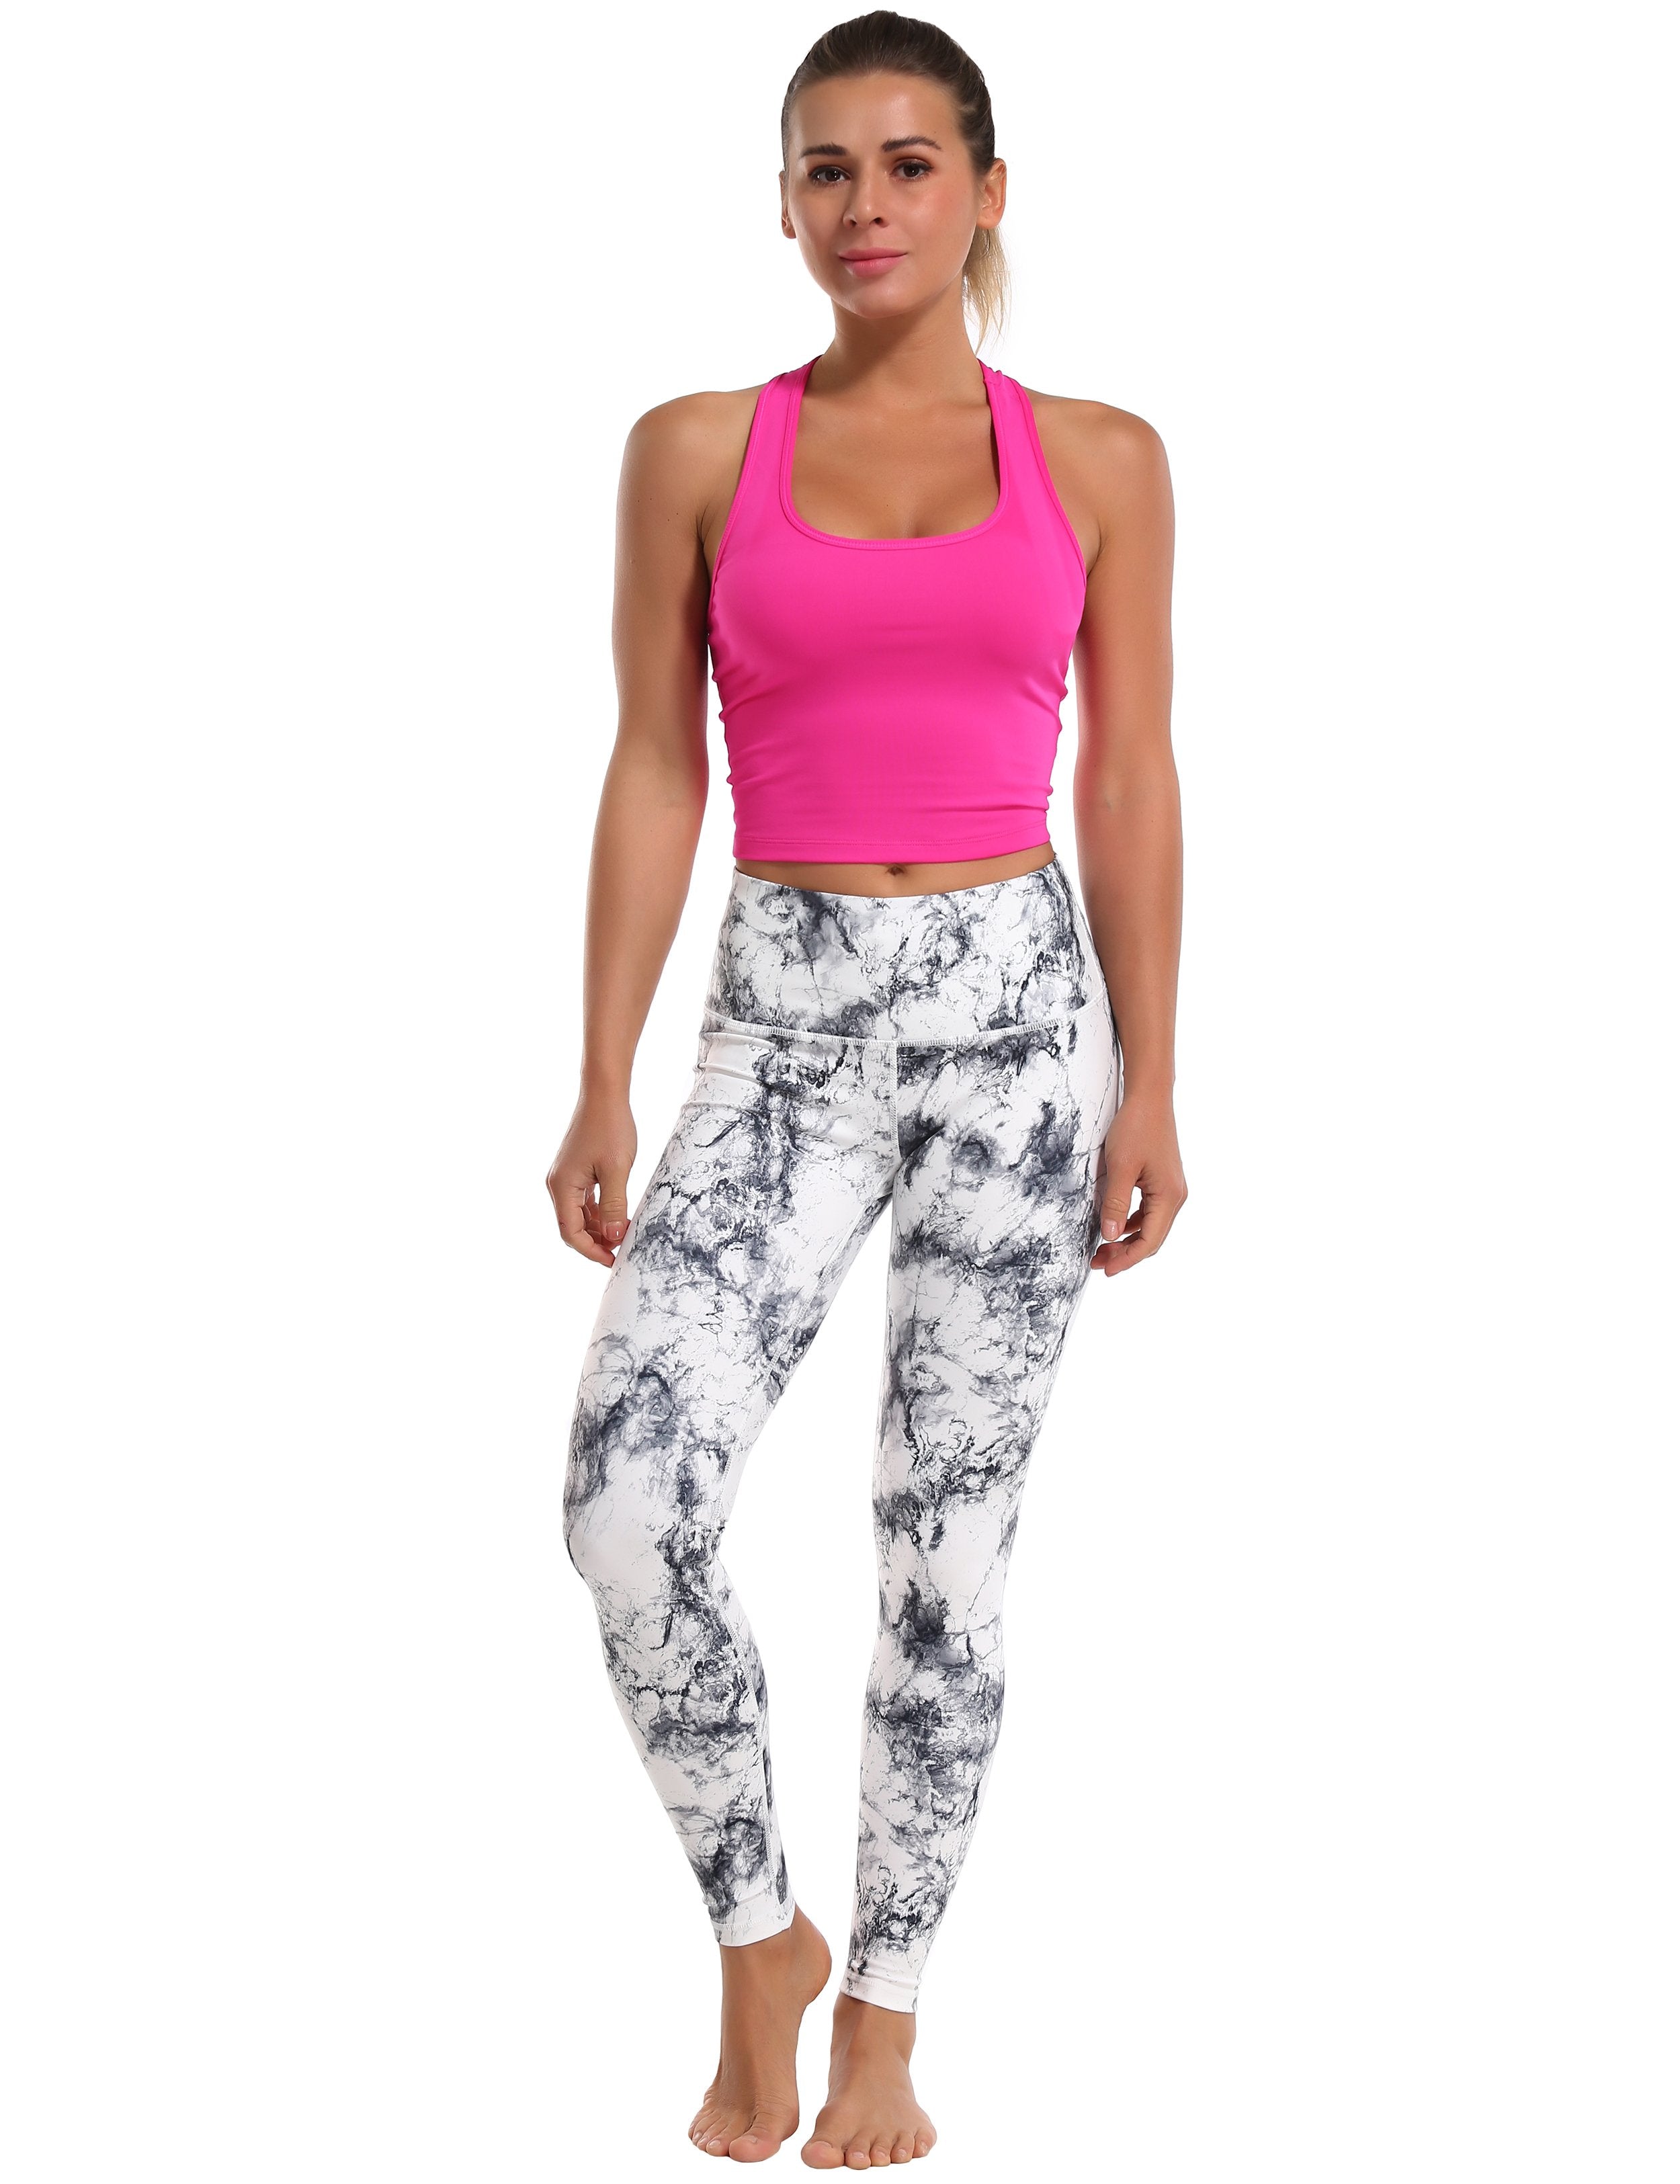 High Waist Gym Pants arabescato 82%Polyester/18%Spandex Fabric doesn't attract lint easily 4-way stretch No see-through Moisture-wicking Tummy control Inner pocket